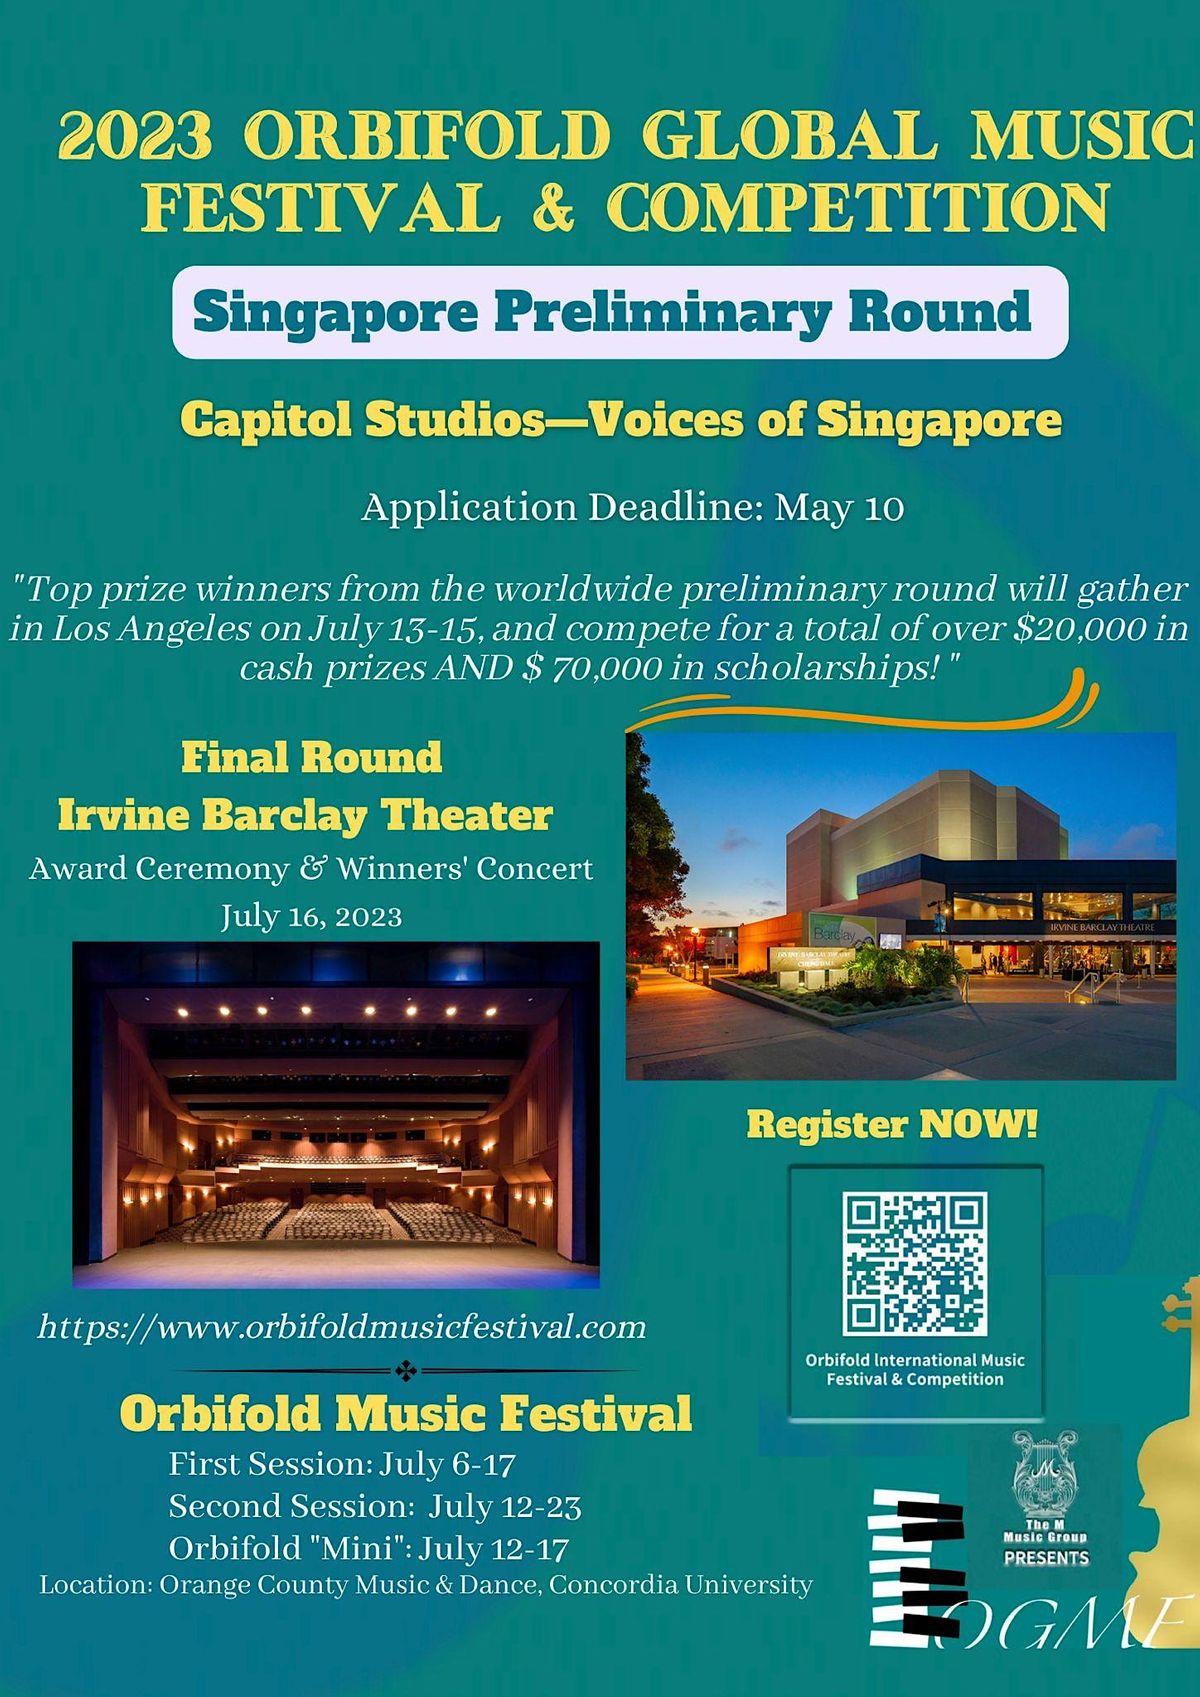 2023 Orbifold Global Music Competition - Singapore Preliminary